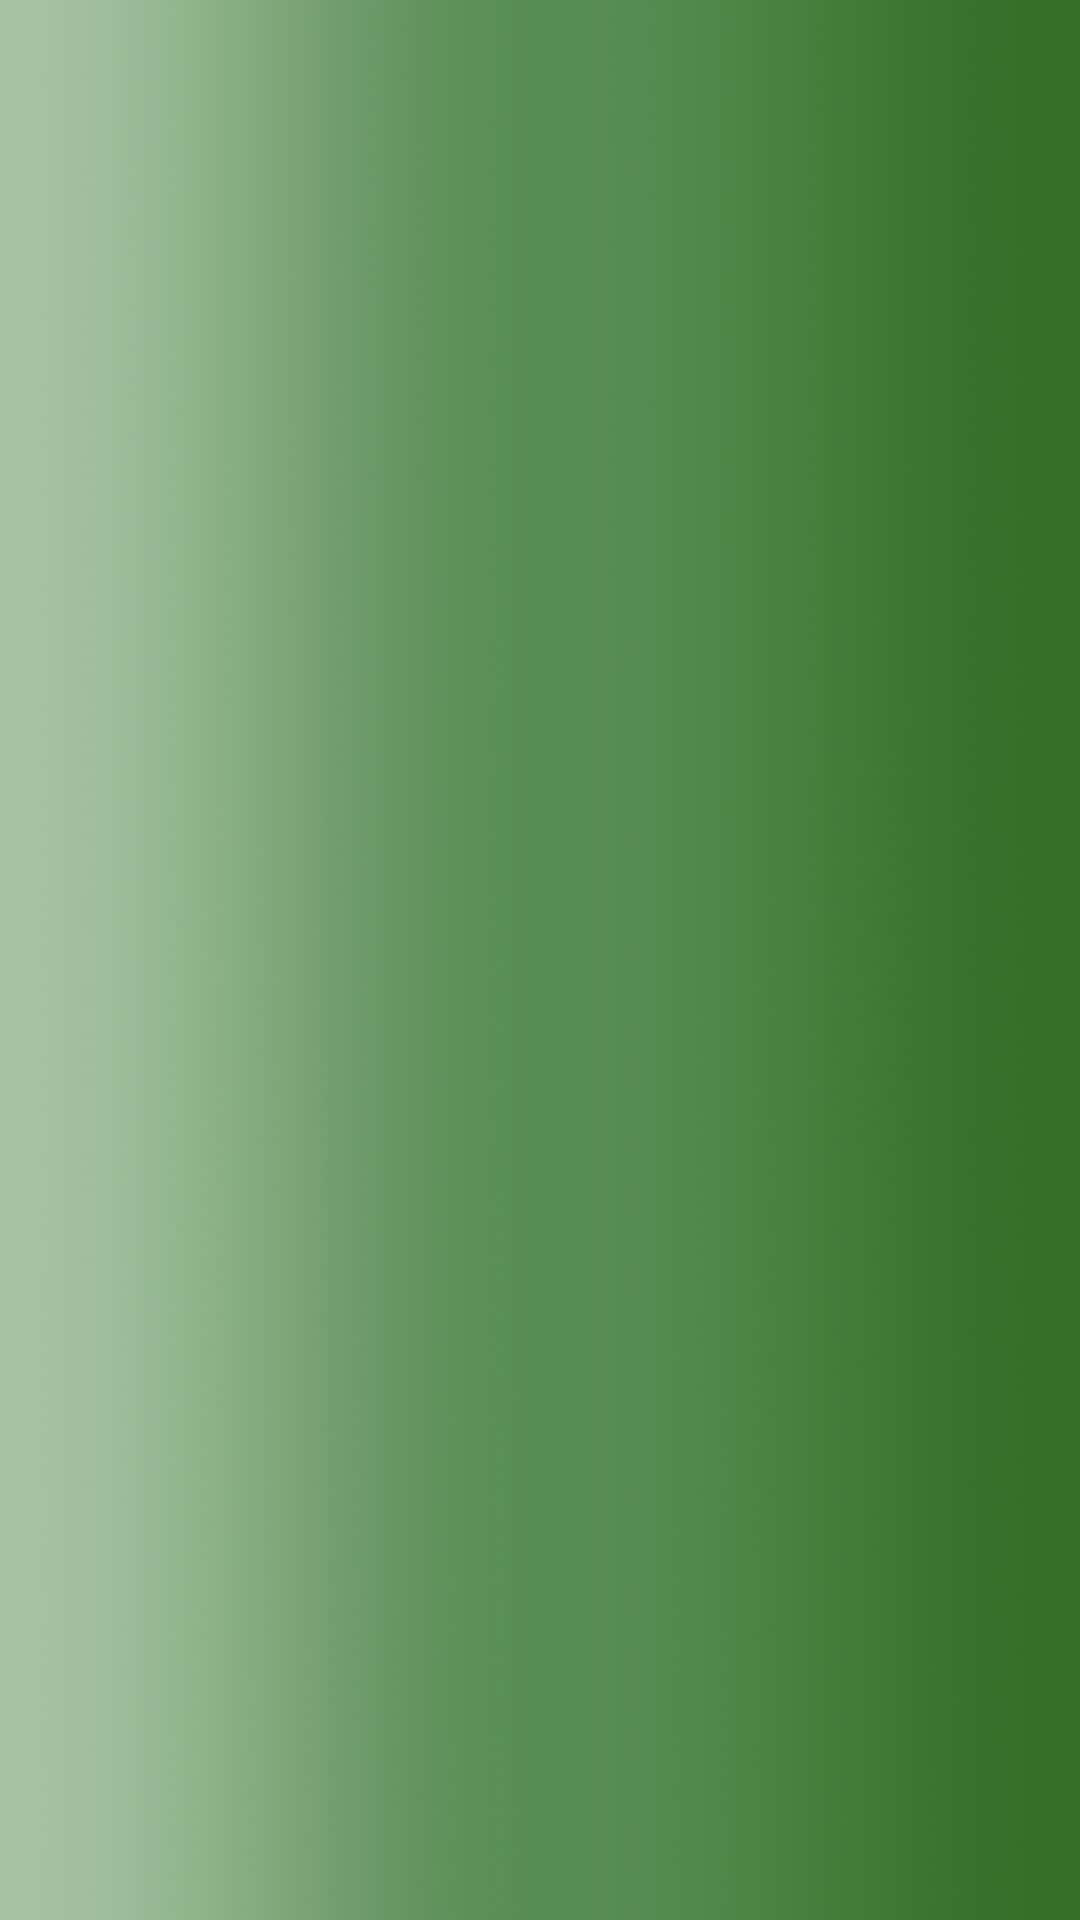 Fun and creative green gradient background